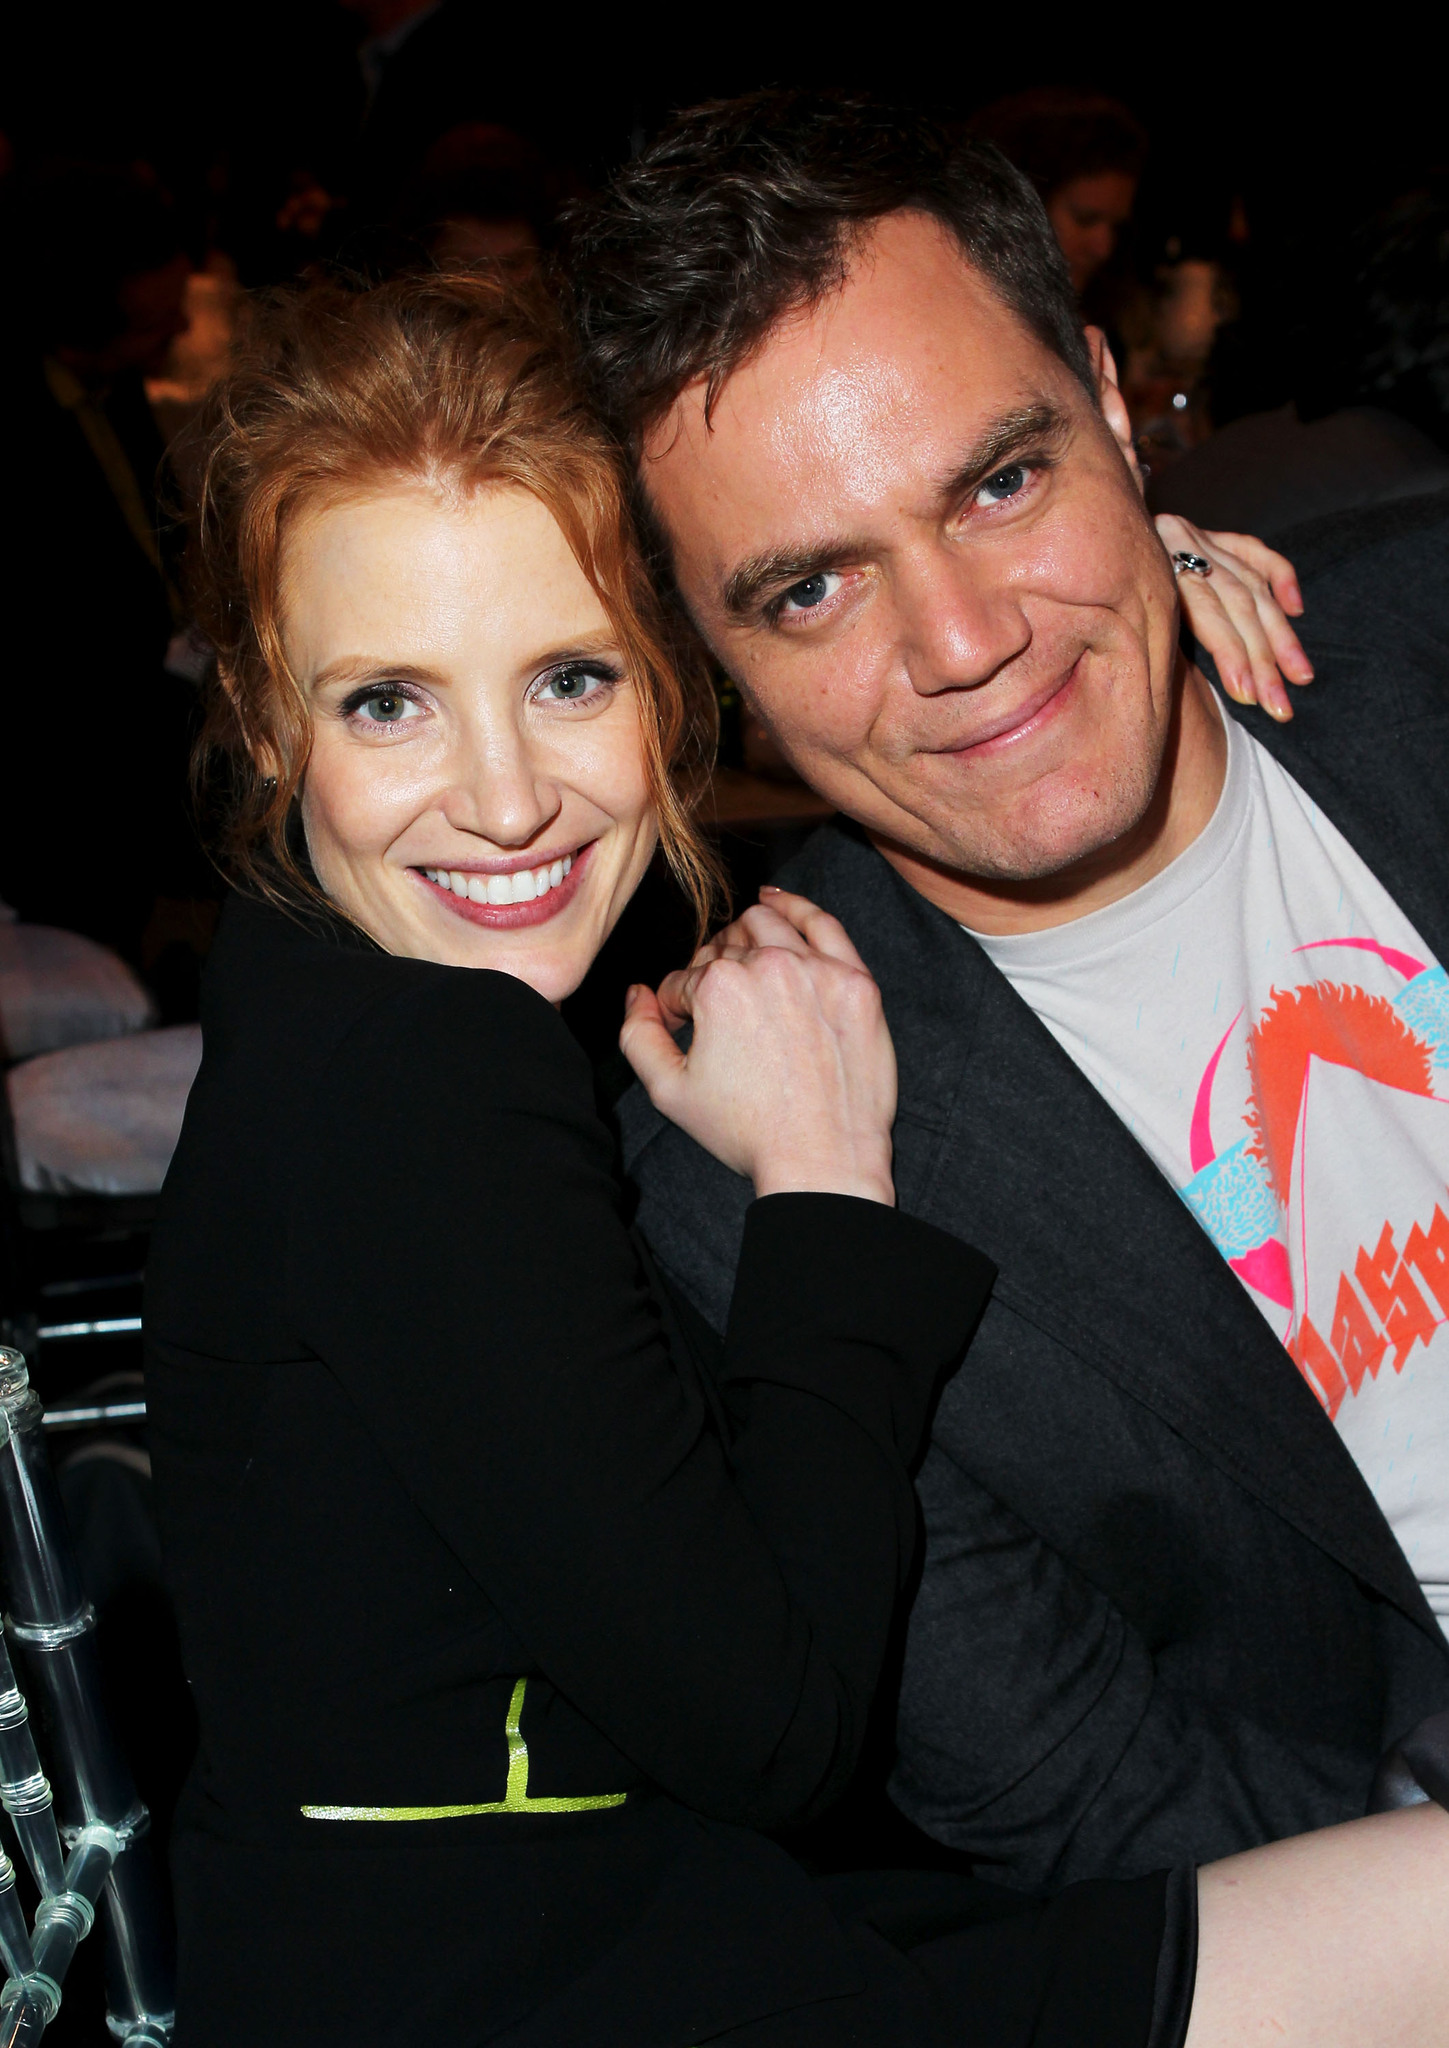 Michael Shannon and Jessica Chastain